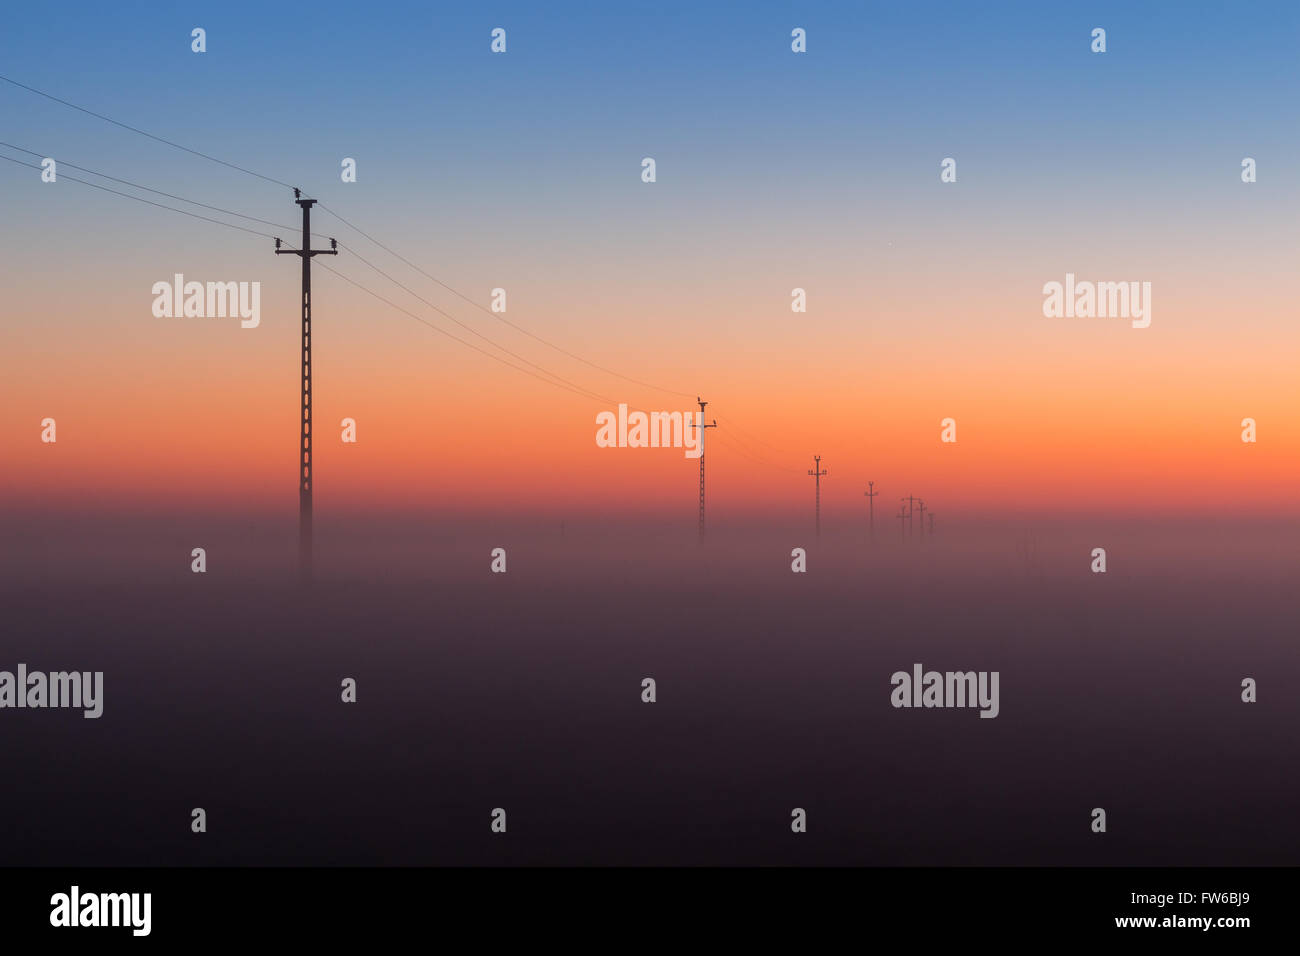 Electrical Power Lines and Pylons disappear over the horizon with Misty Sunrise, Sunset Stock Photo